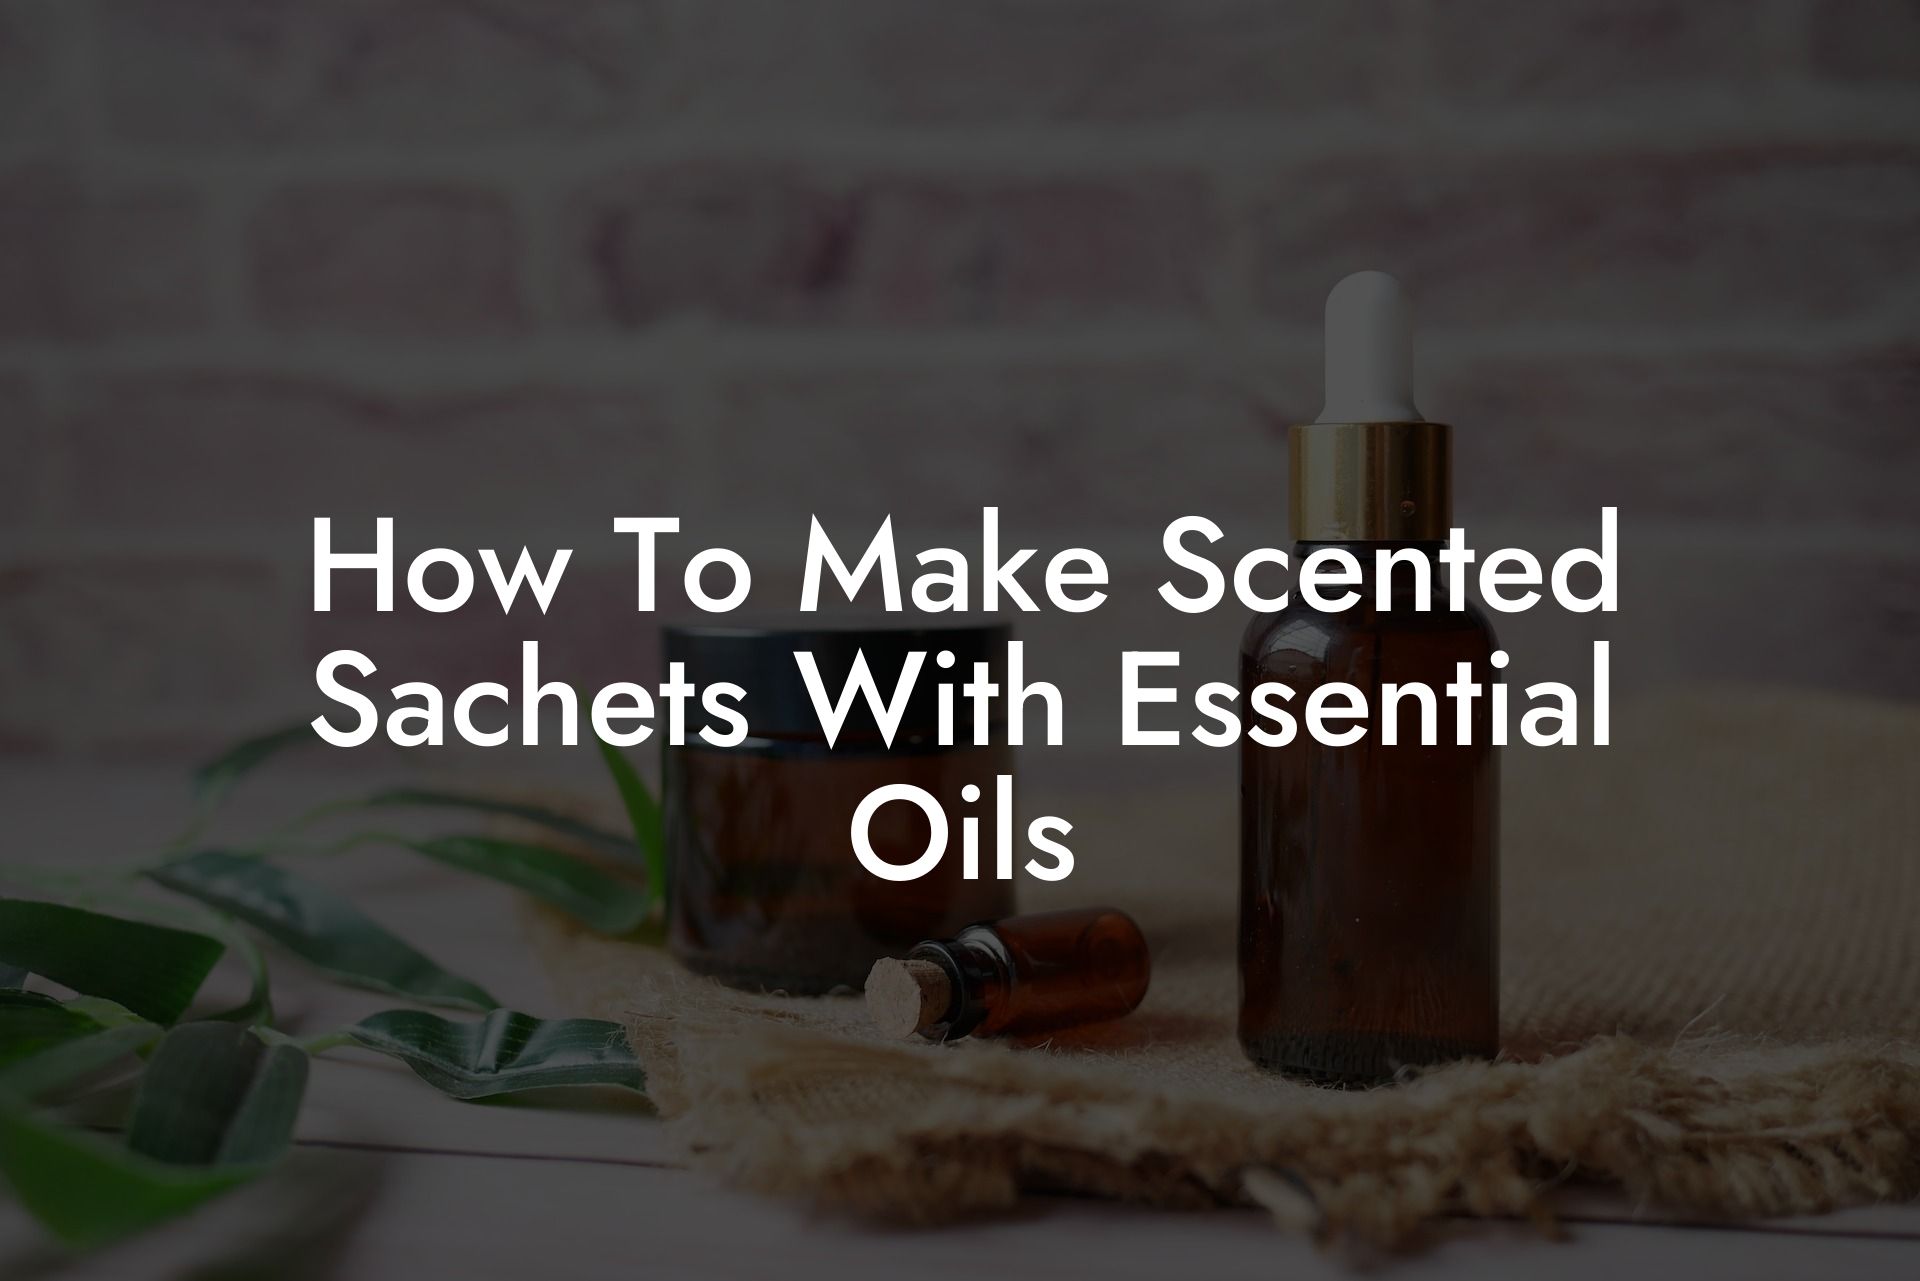 How To Make Scented Sachets With Essential Oils